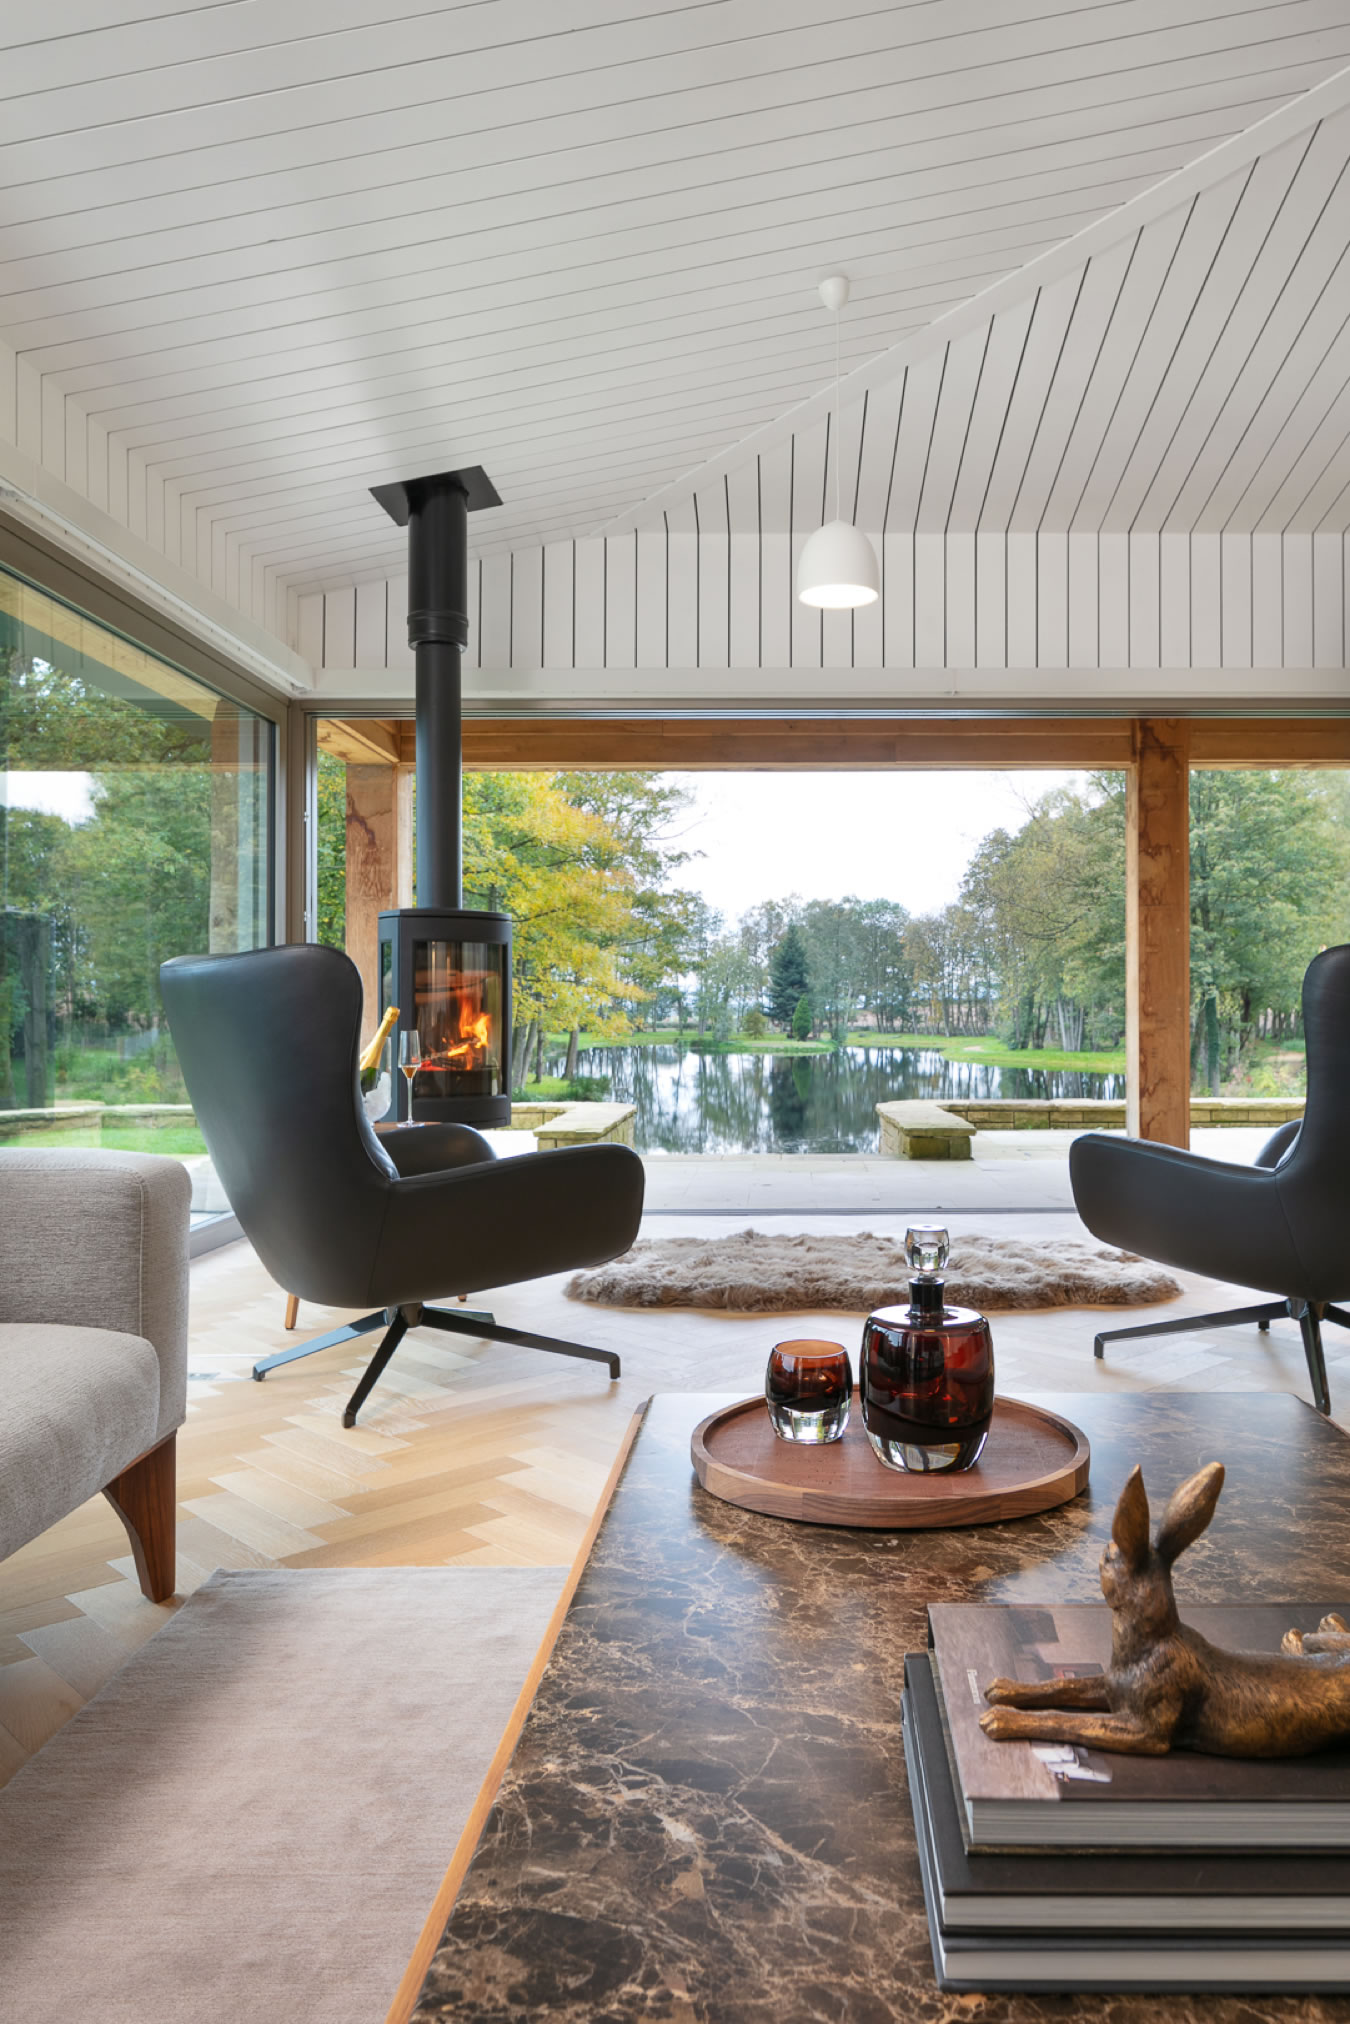 Lakeside Lodge. A project by James Roberts Interior Design Practice